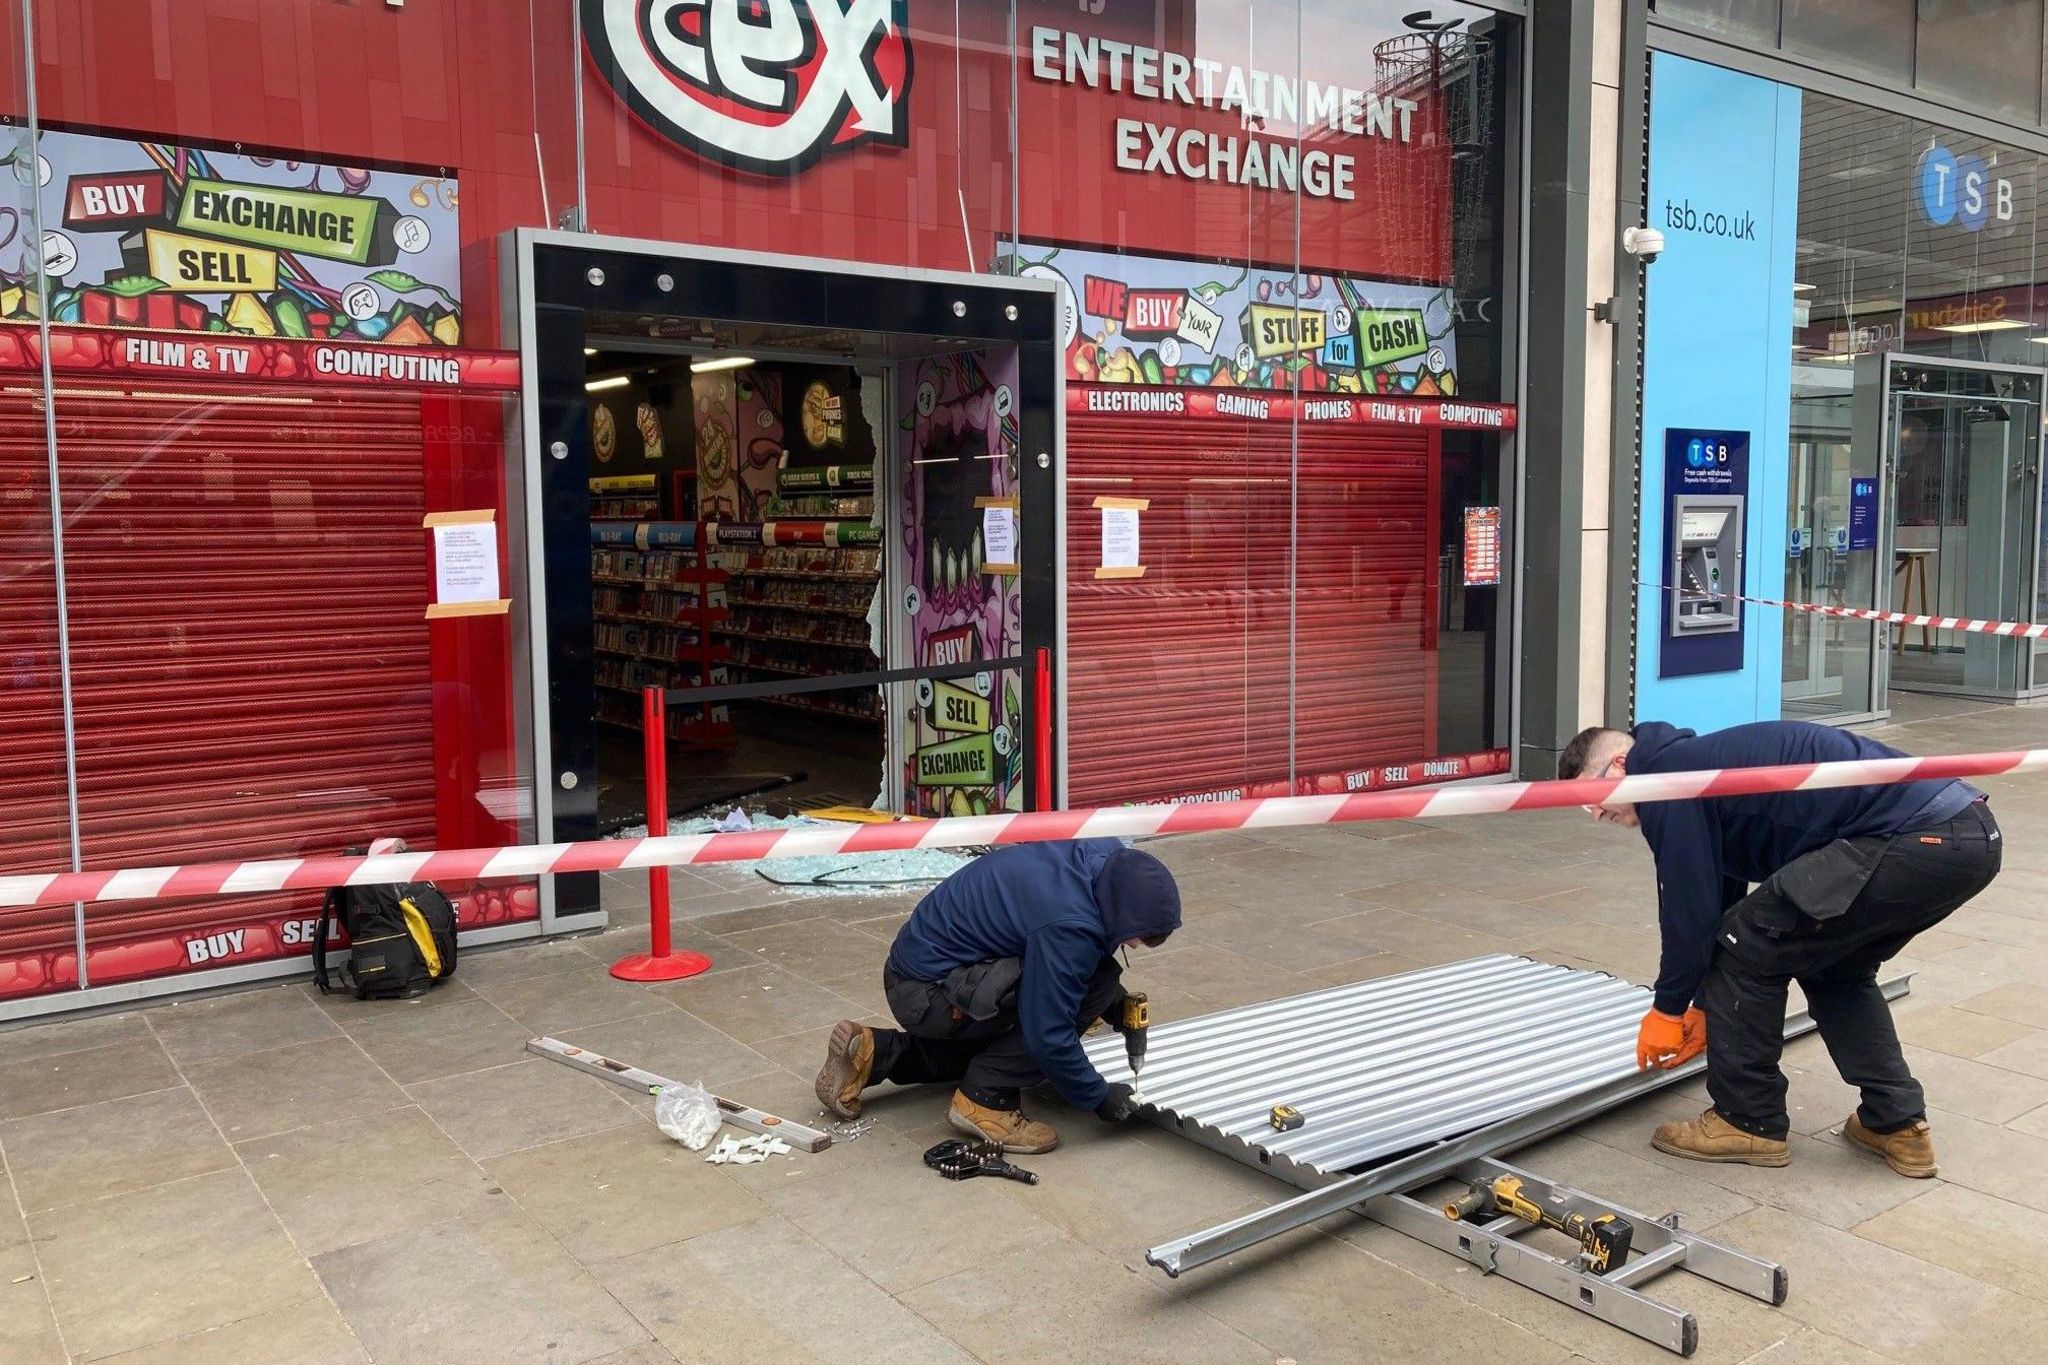 Workmen outside the CeX electronics retail and repair shop